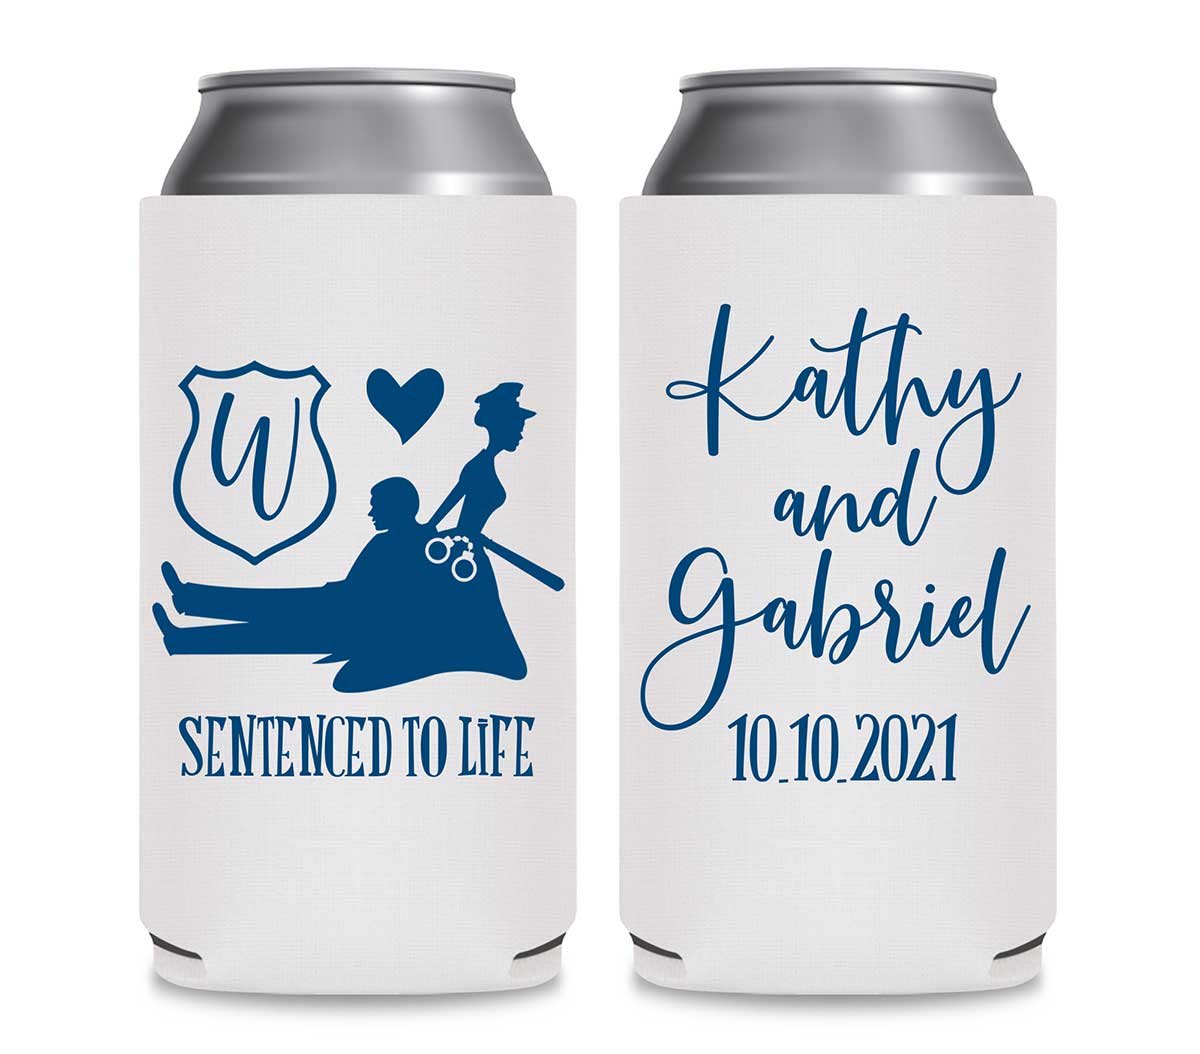 Sentenced To Life 1A Policewoman Wedding Foldable 12 oz Slim Can Koozies Wedding Gifts for Guests